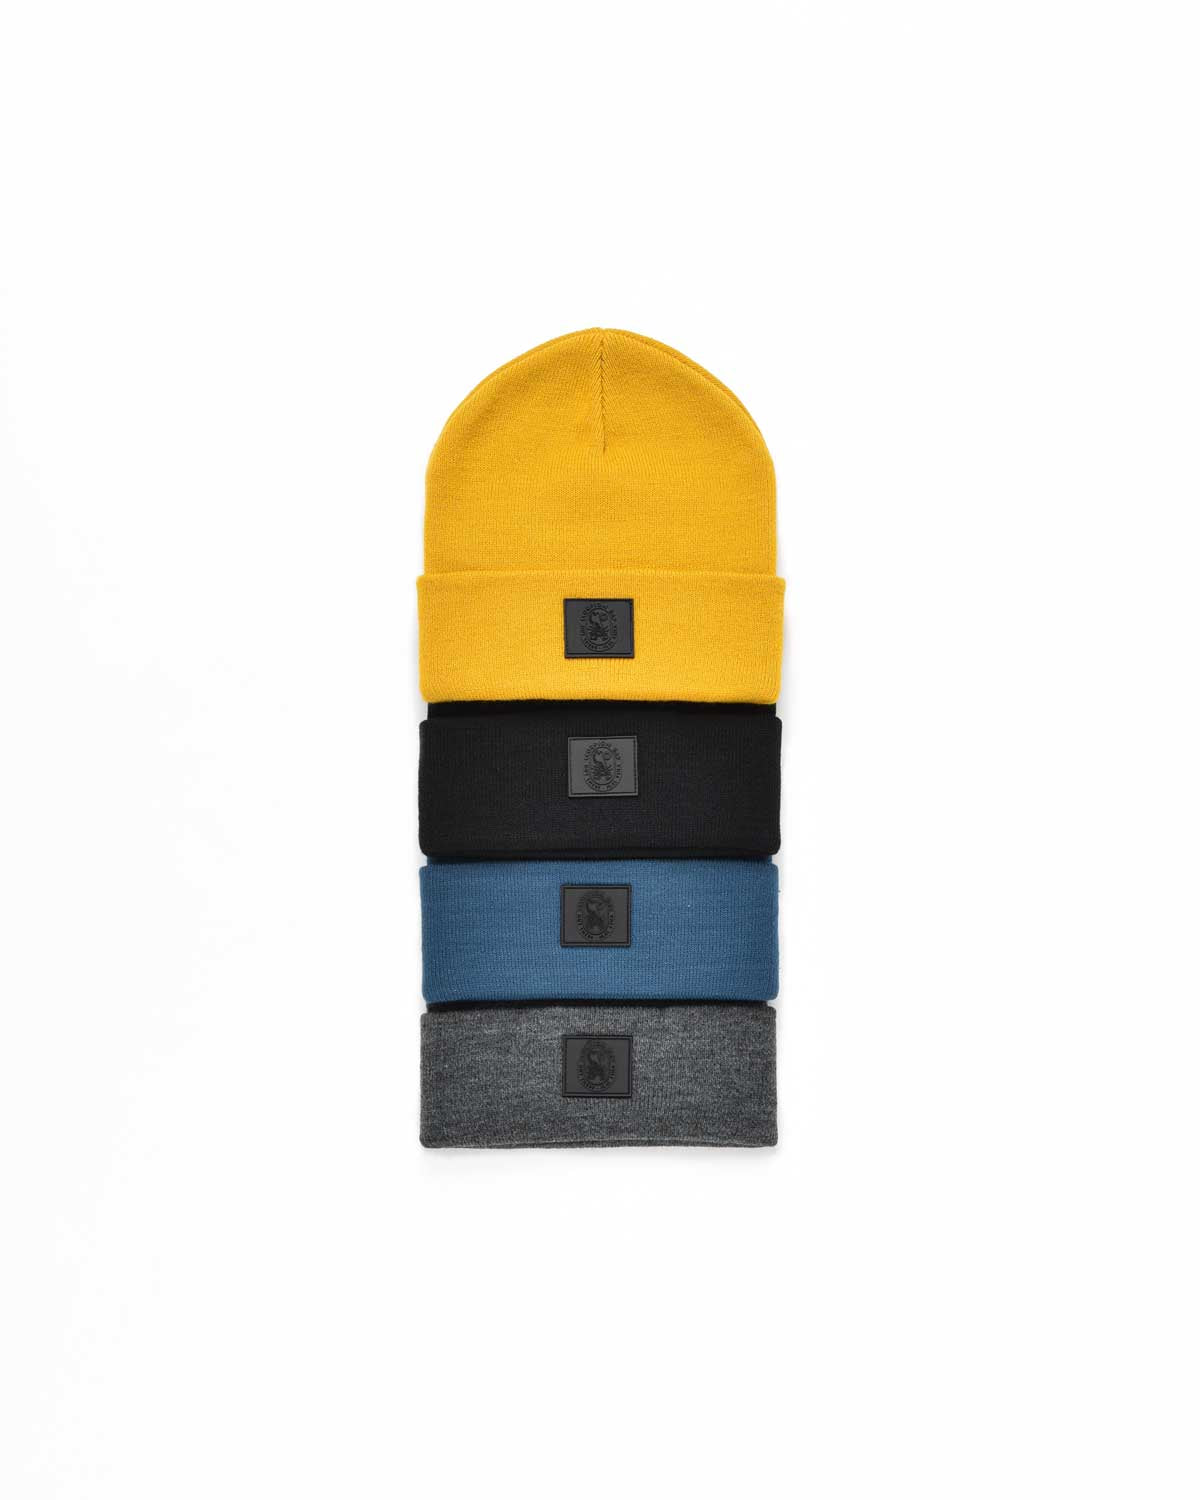 Essential Black Beanie With Logo Patch